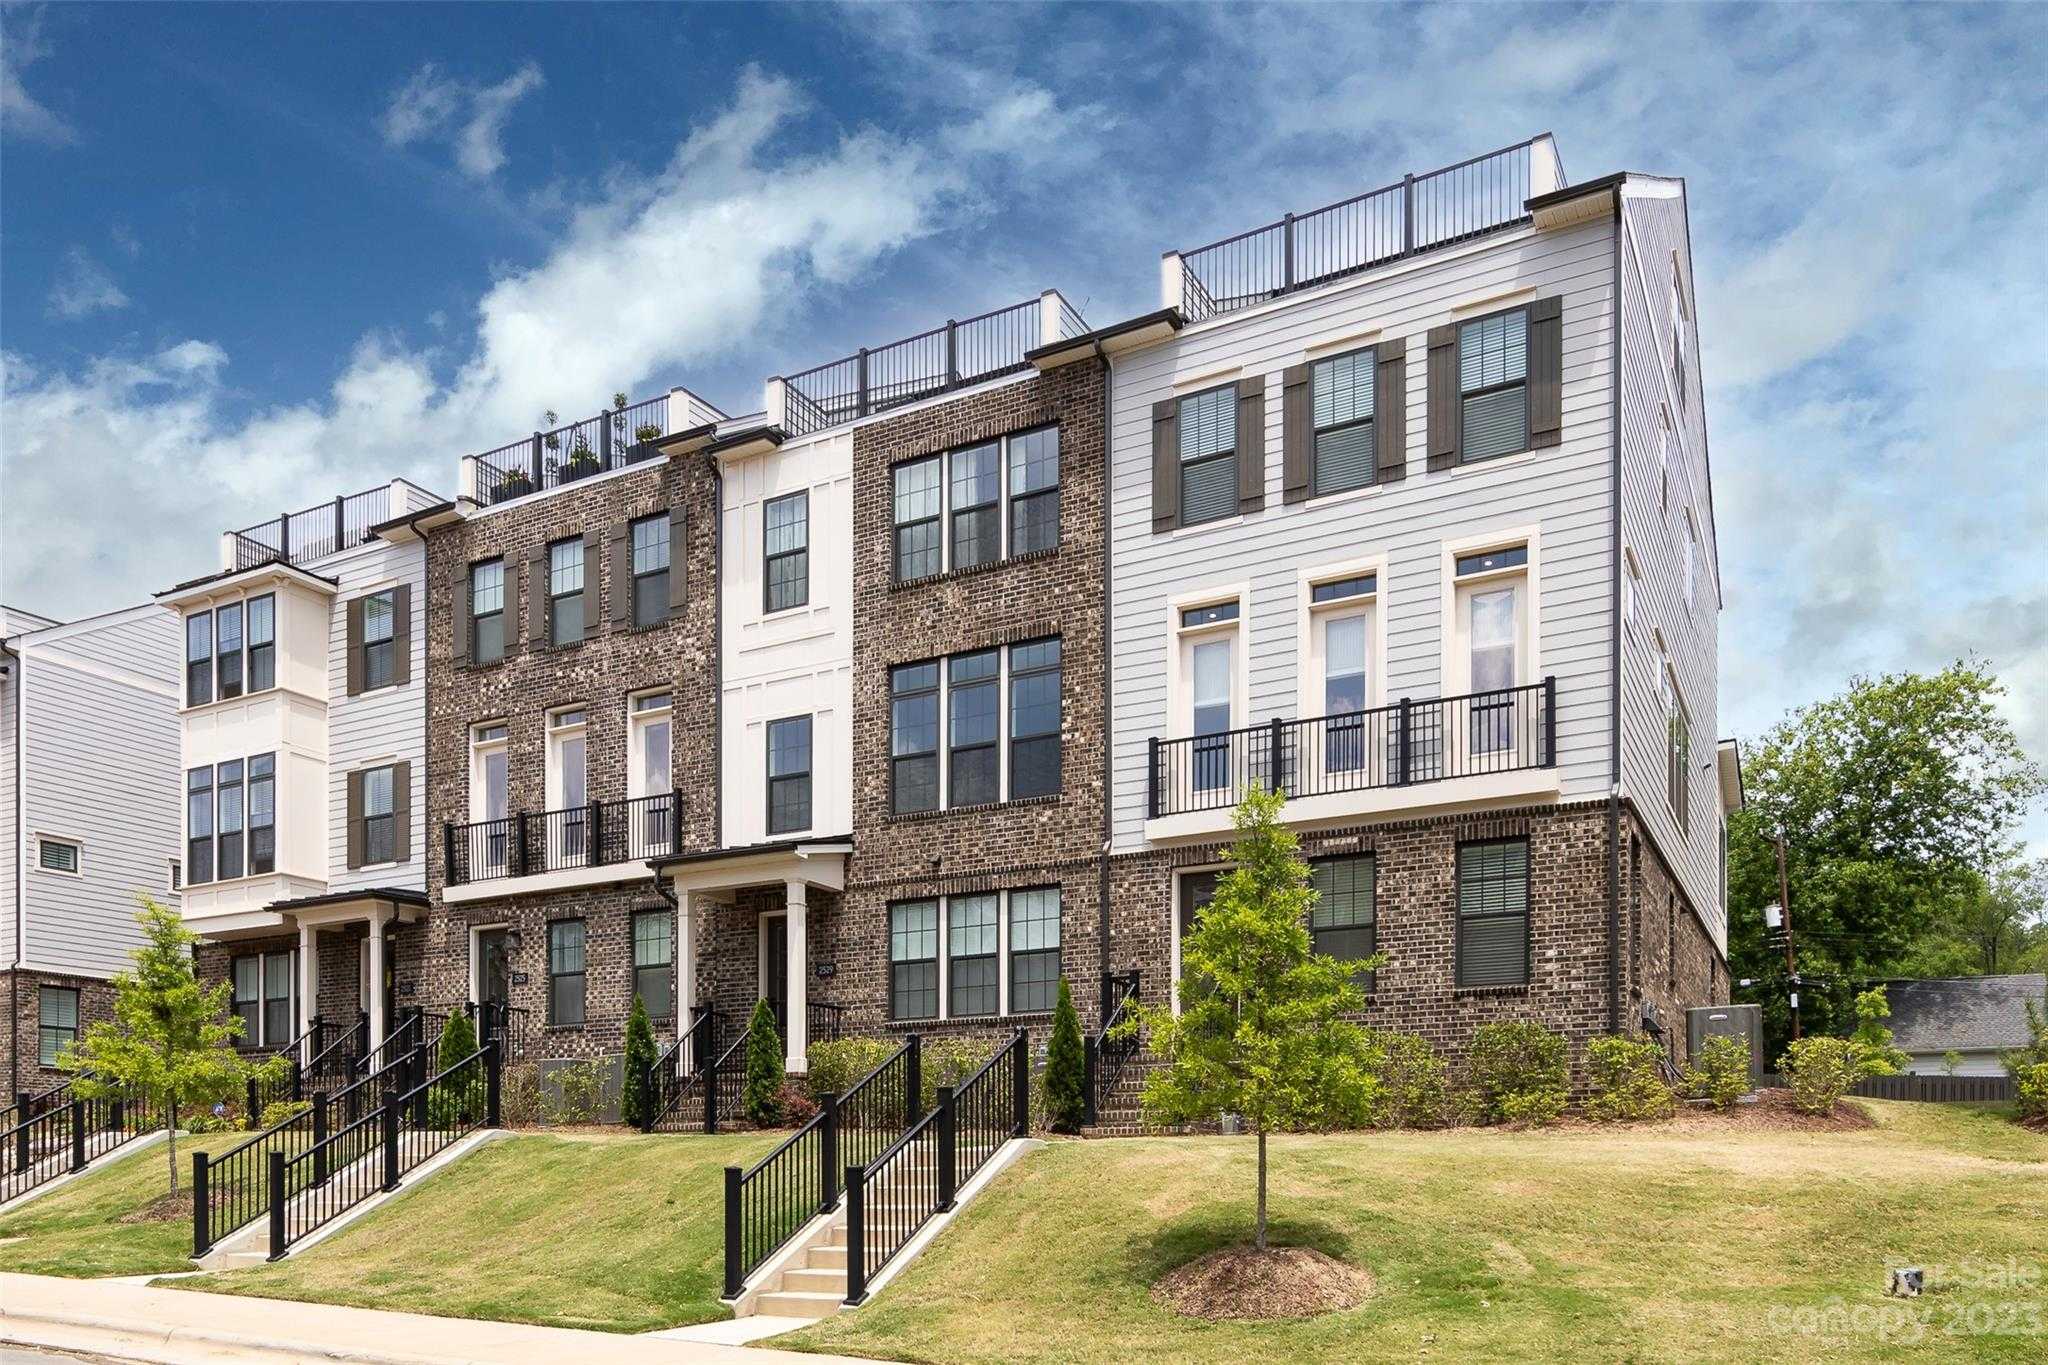 View Charlotte, NC 28204 townhome